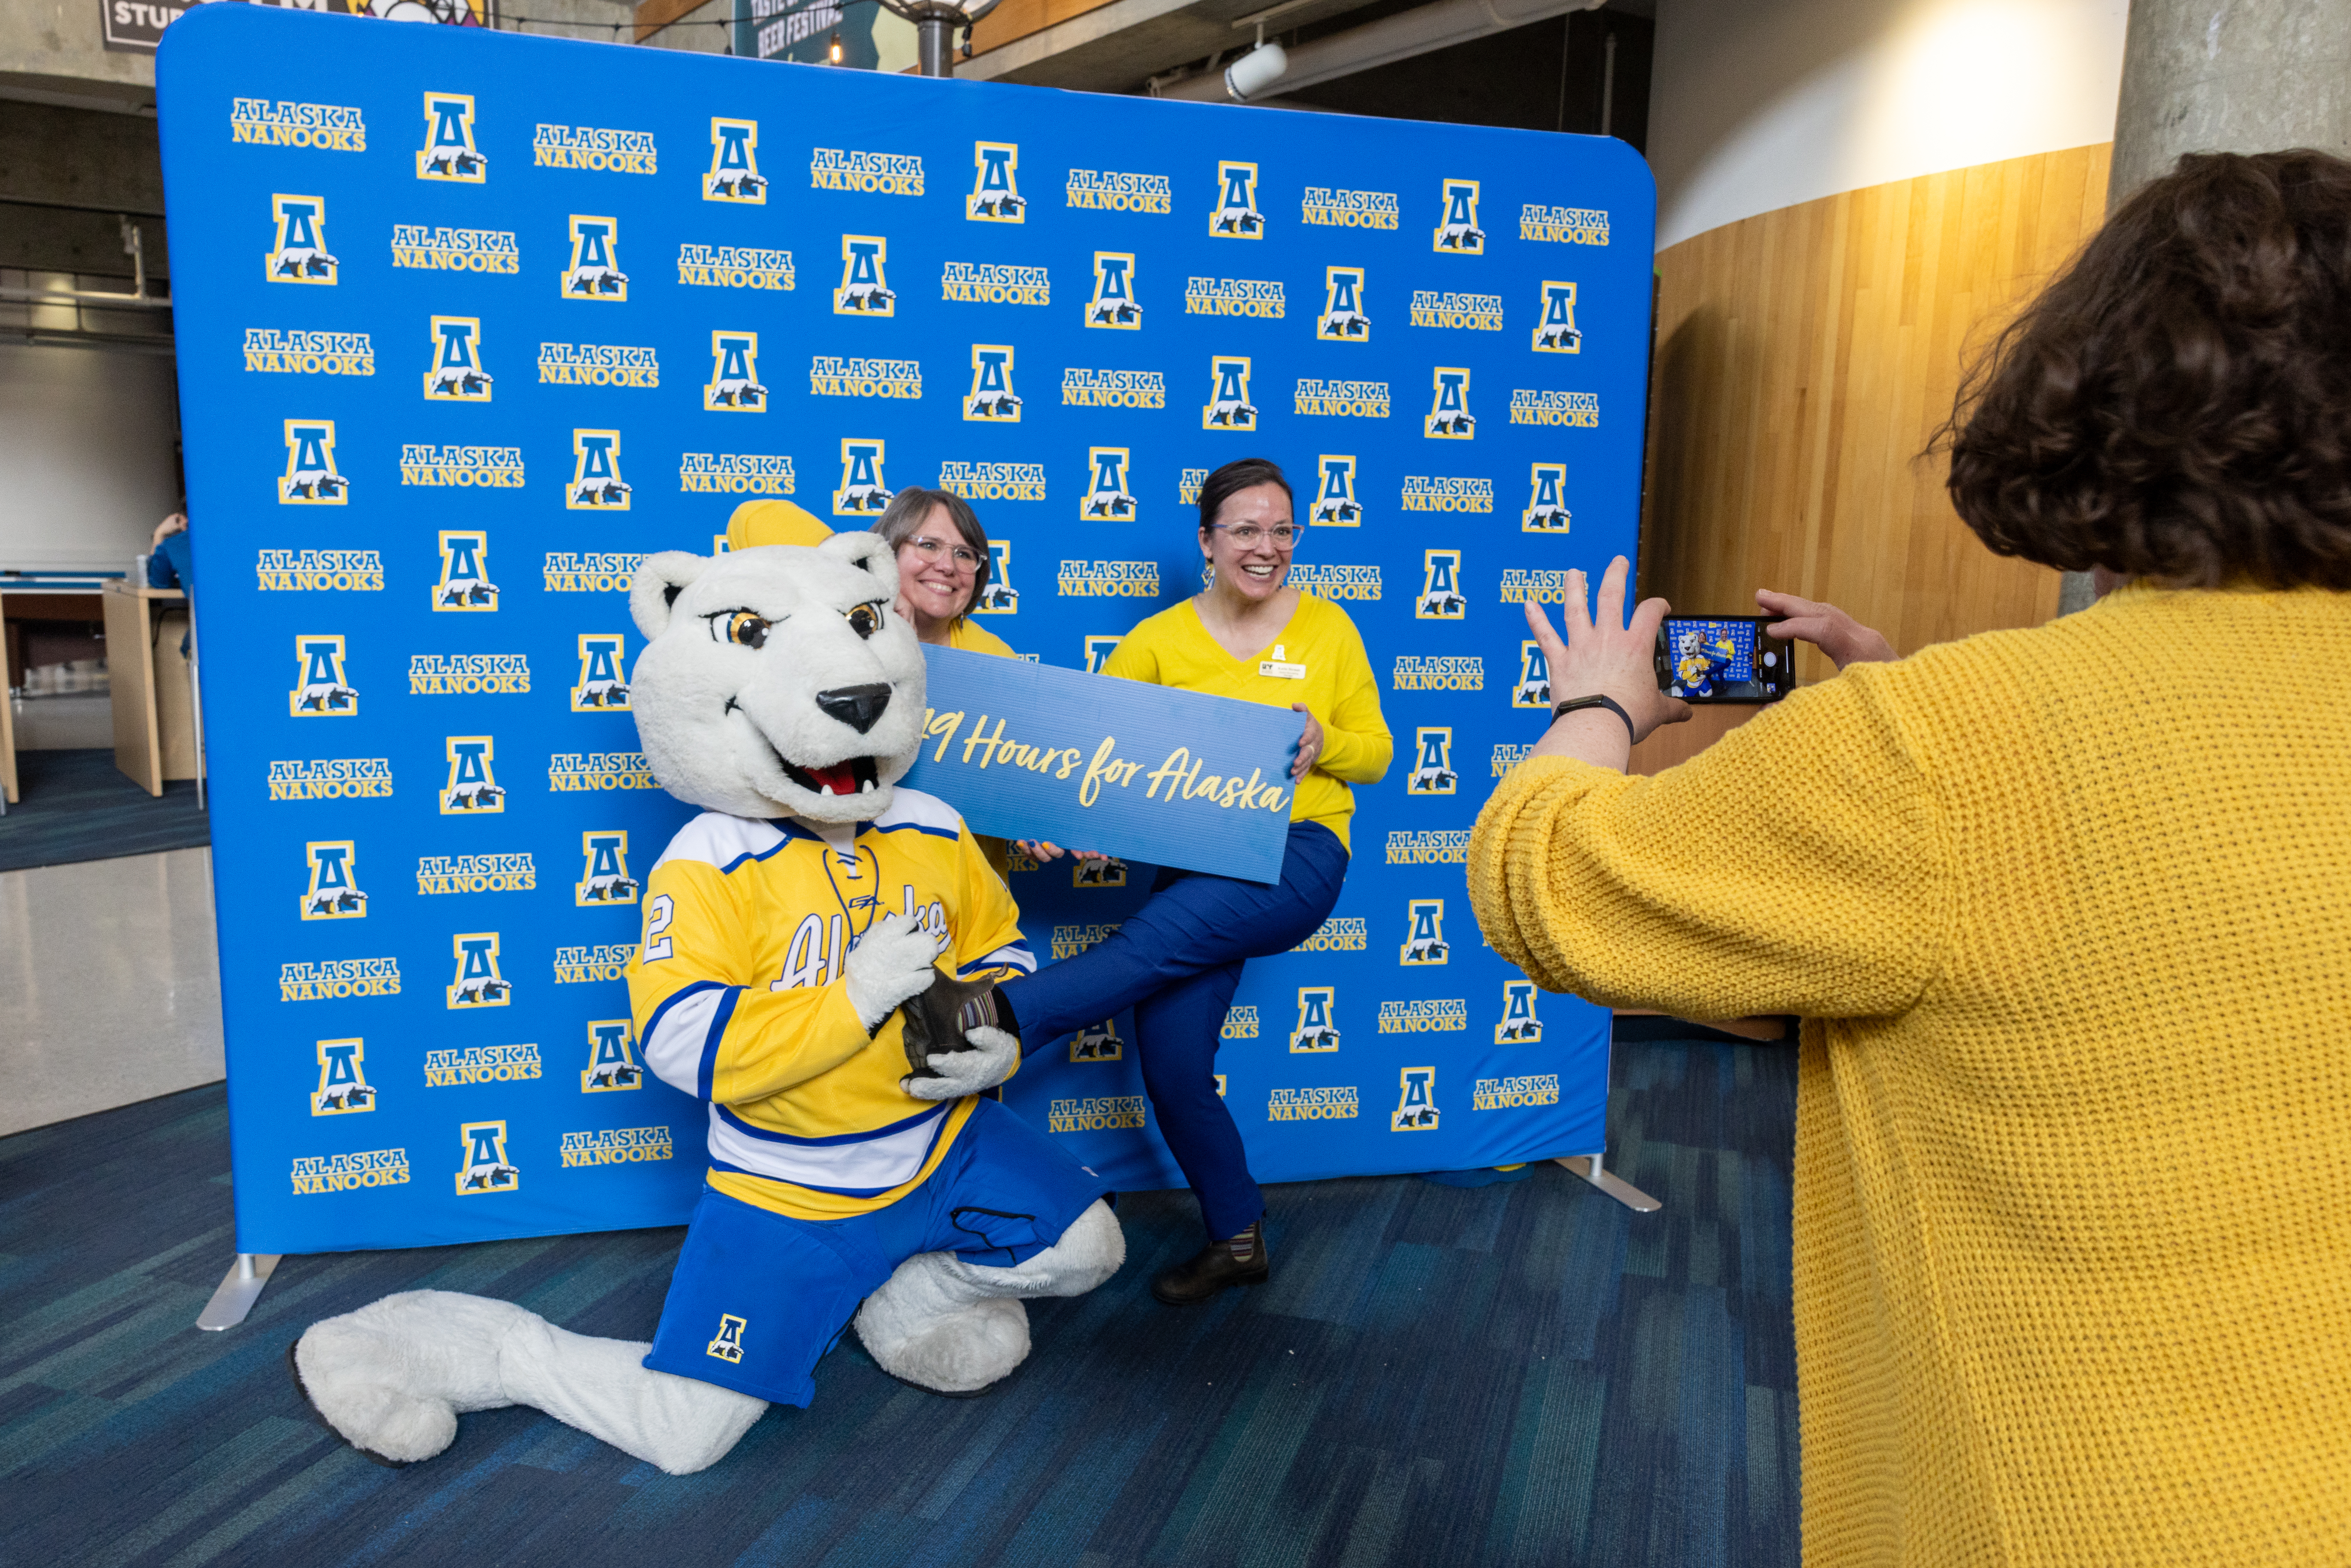 a polar bear mascot and two women hold a sign saying "#49HoursForAlaska" in front of a blue backdrop while someone takes their picture.